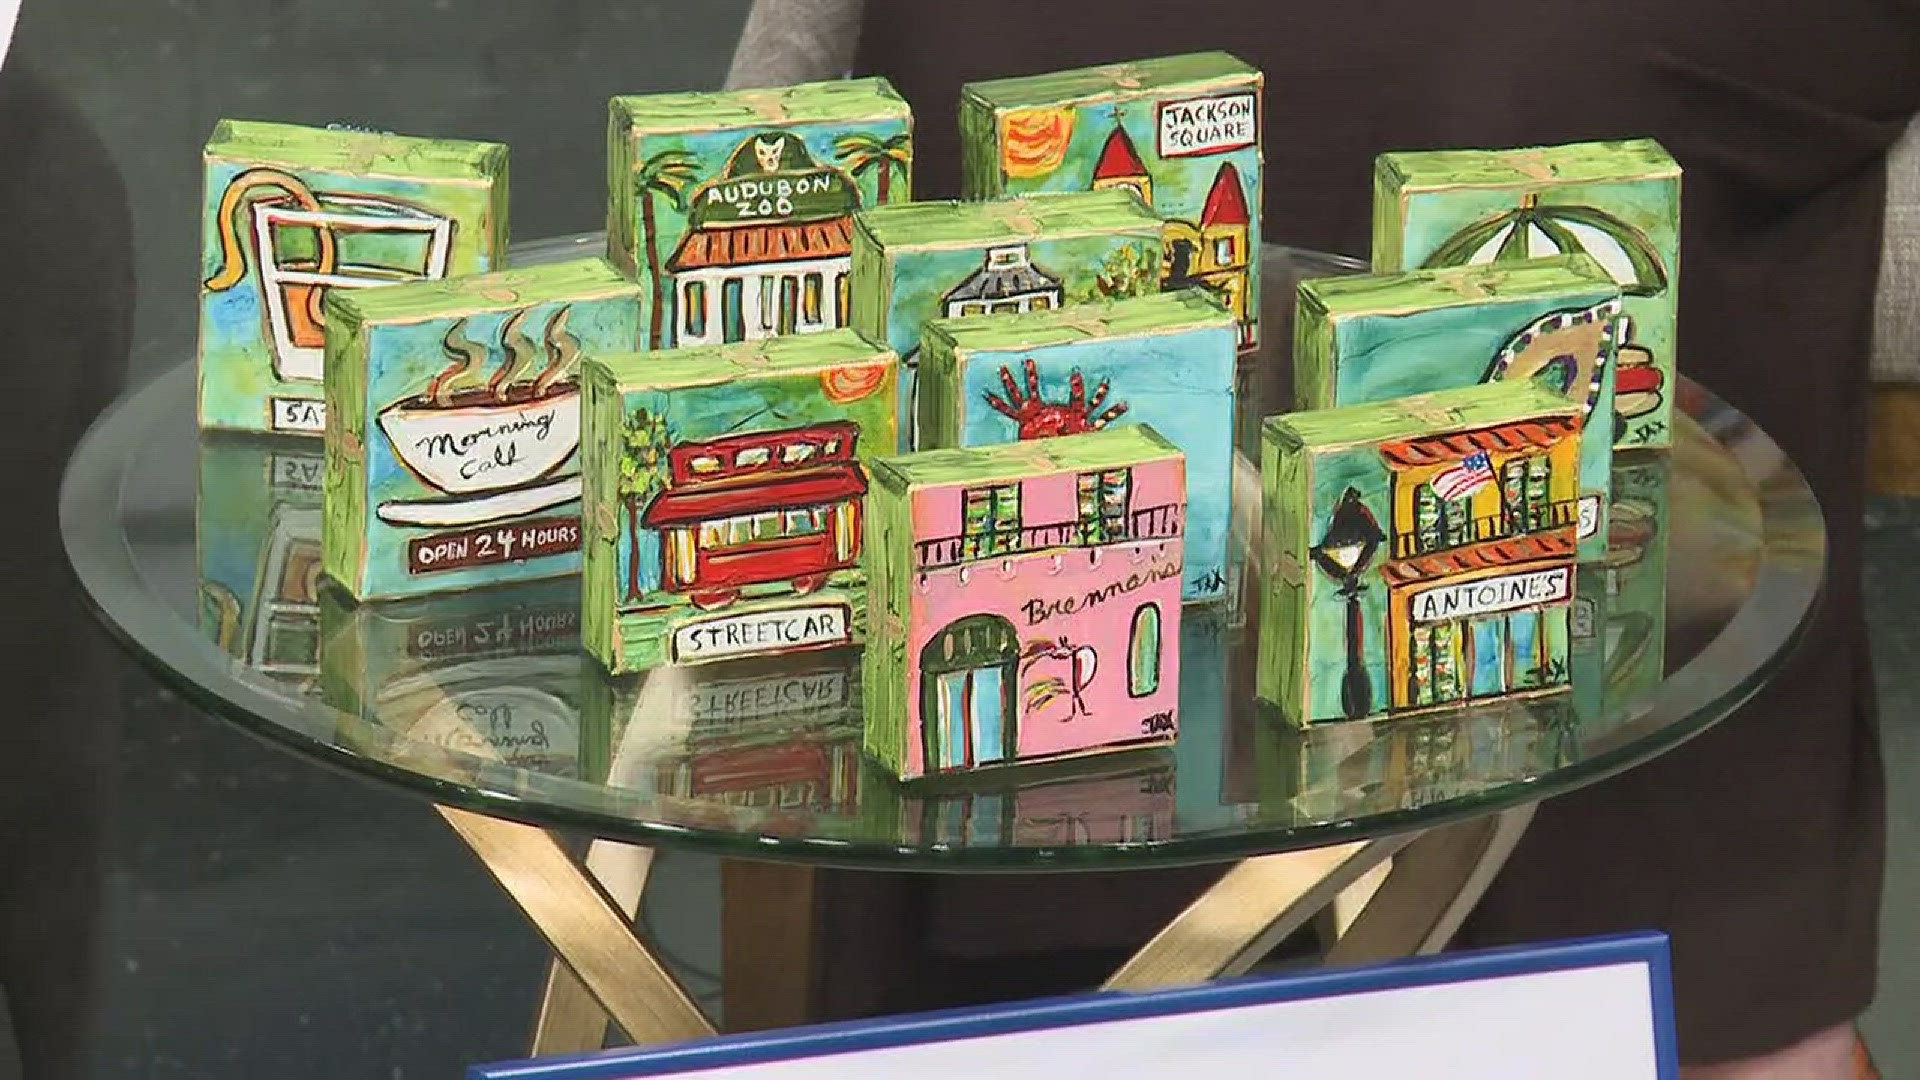 Meet local artist Jax Frey, the record holder for most original acrylic paintings on canvas thanks to her "little views" mini paintings.